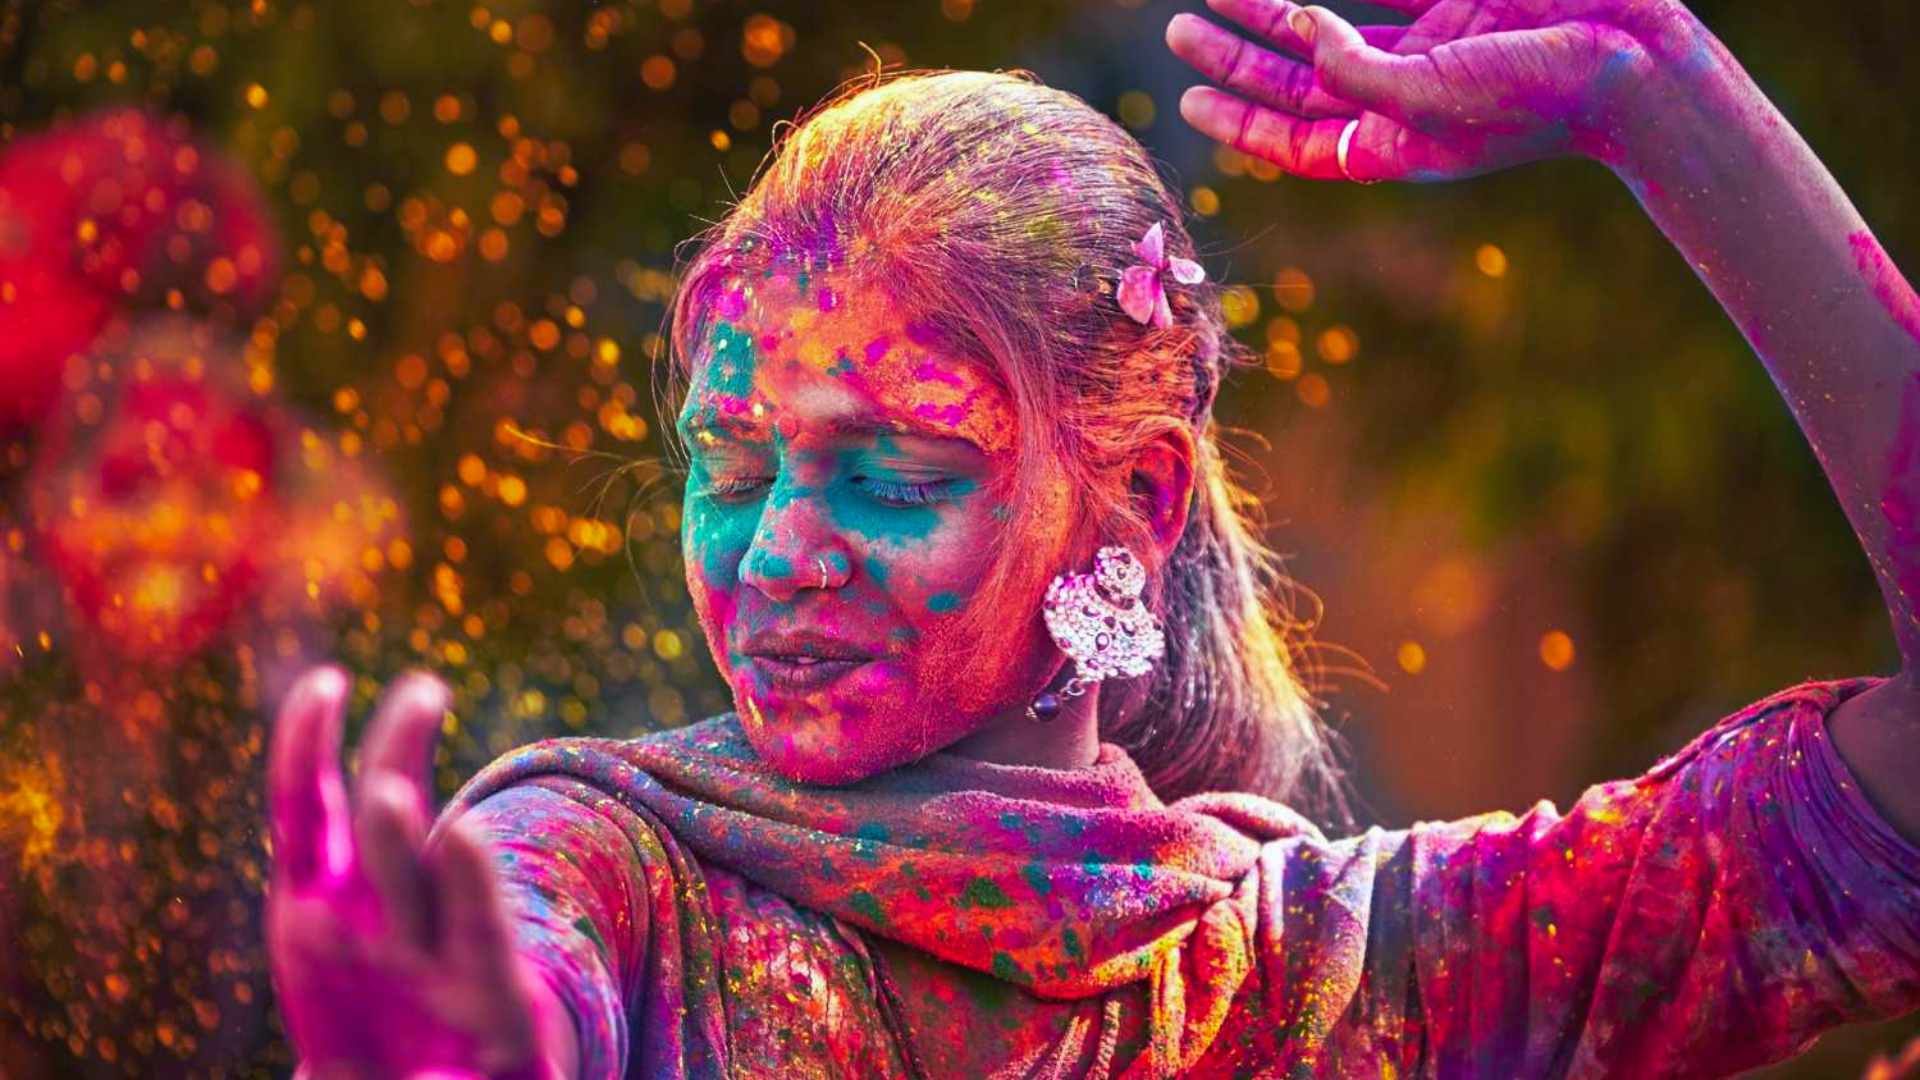 Breaking Stereotypes, Special Holi Celebration For ‘Widows’ In Vrindavan